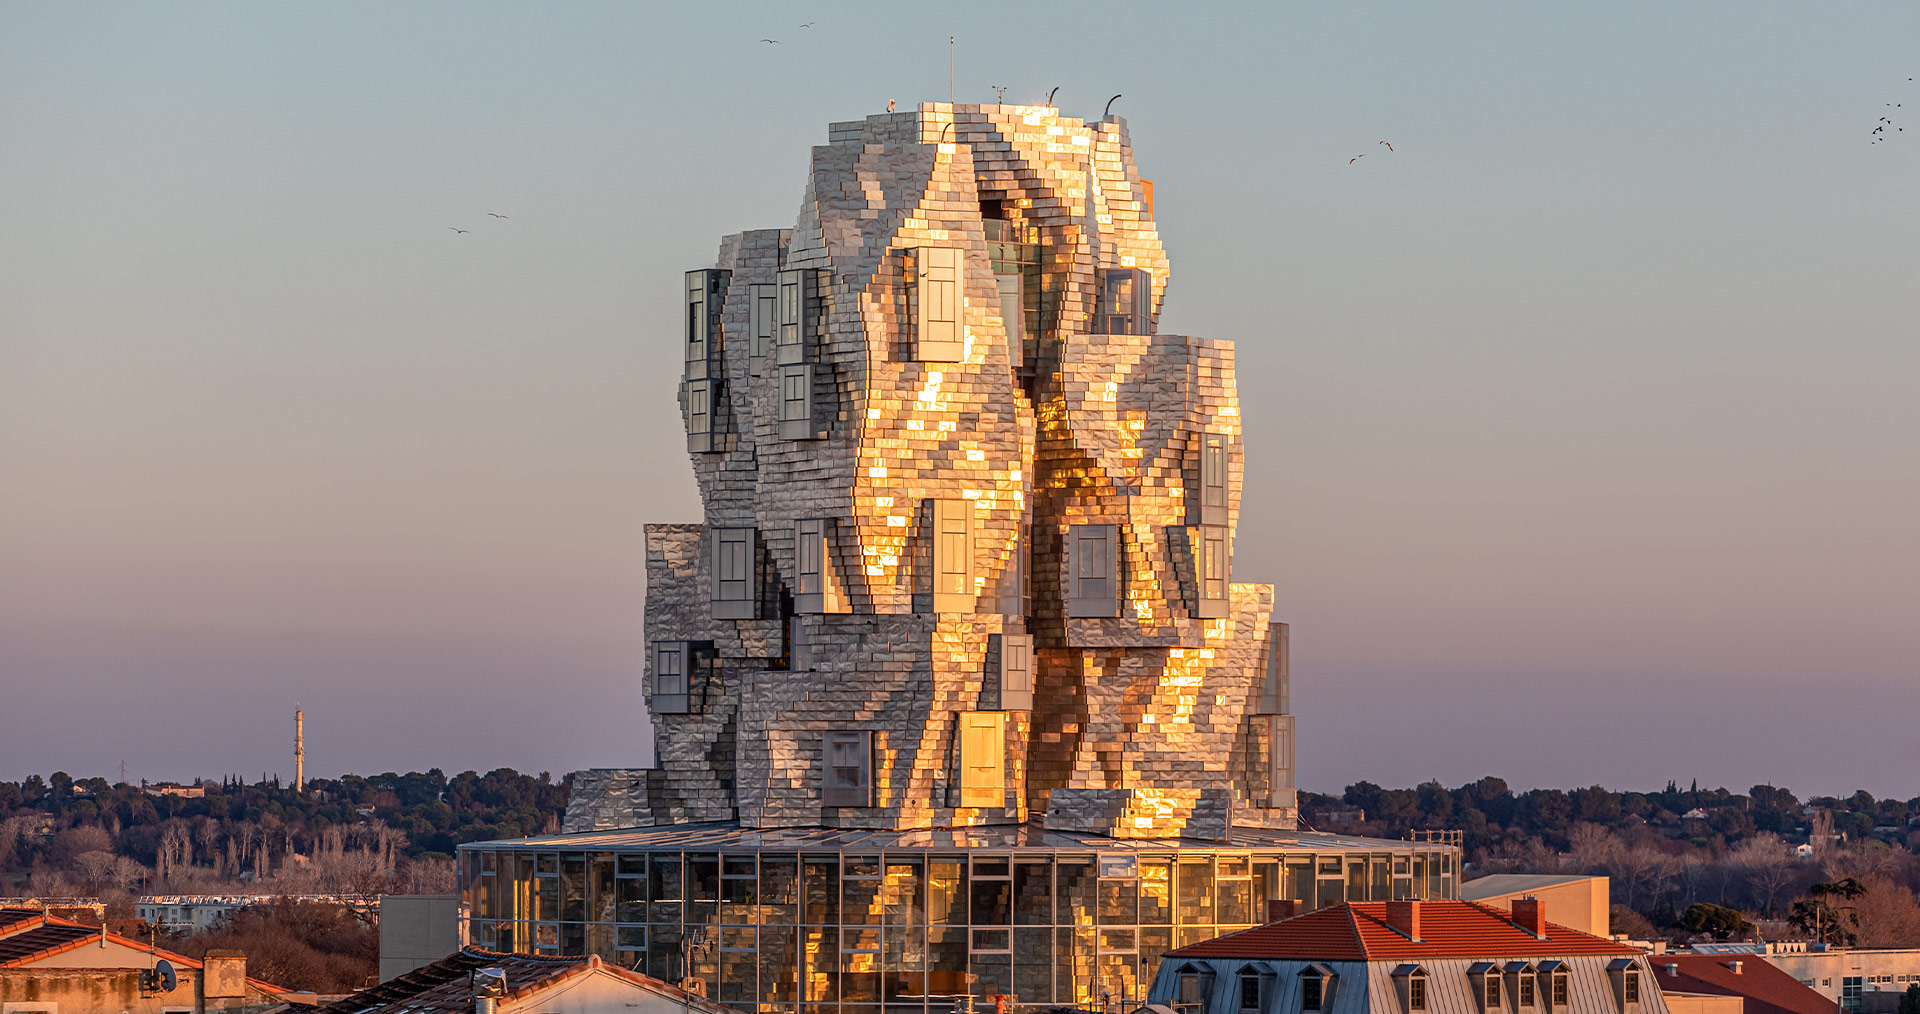 Tower designed by Frank Gehry at the Luma Cultural Centre in Arles, France, a striking landmark